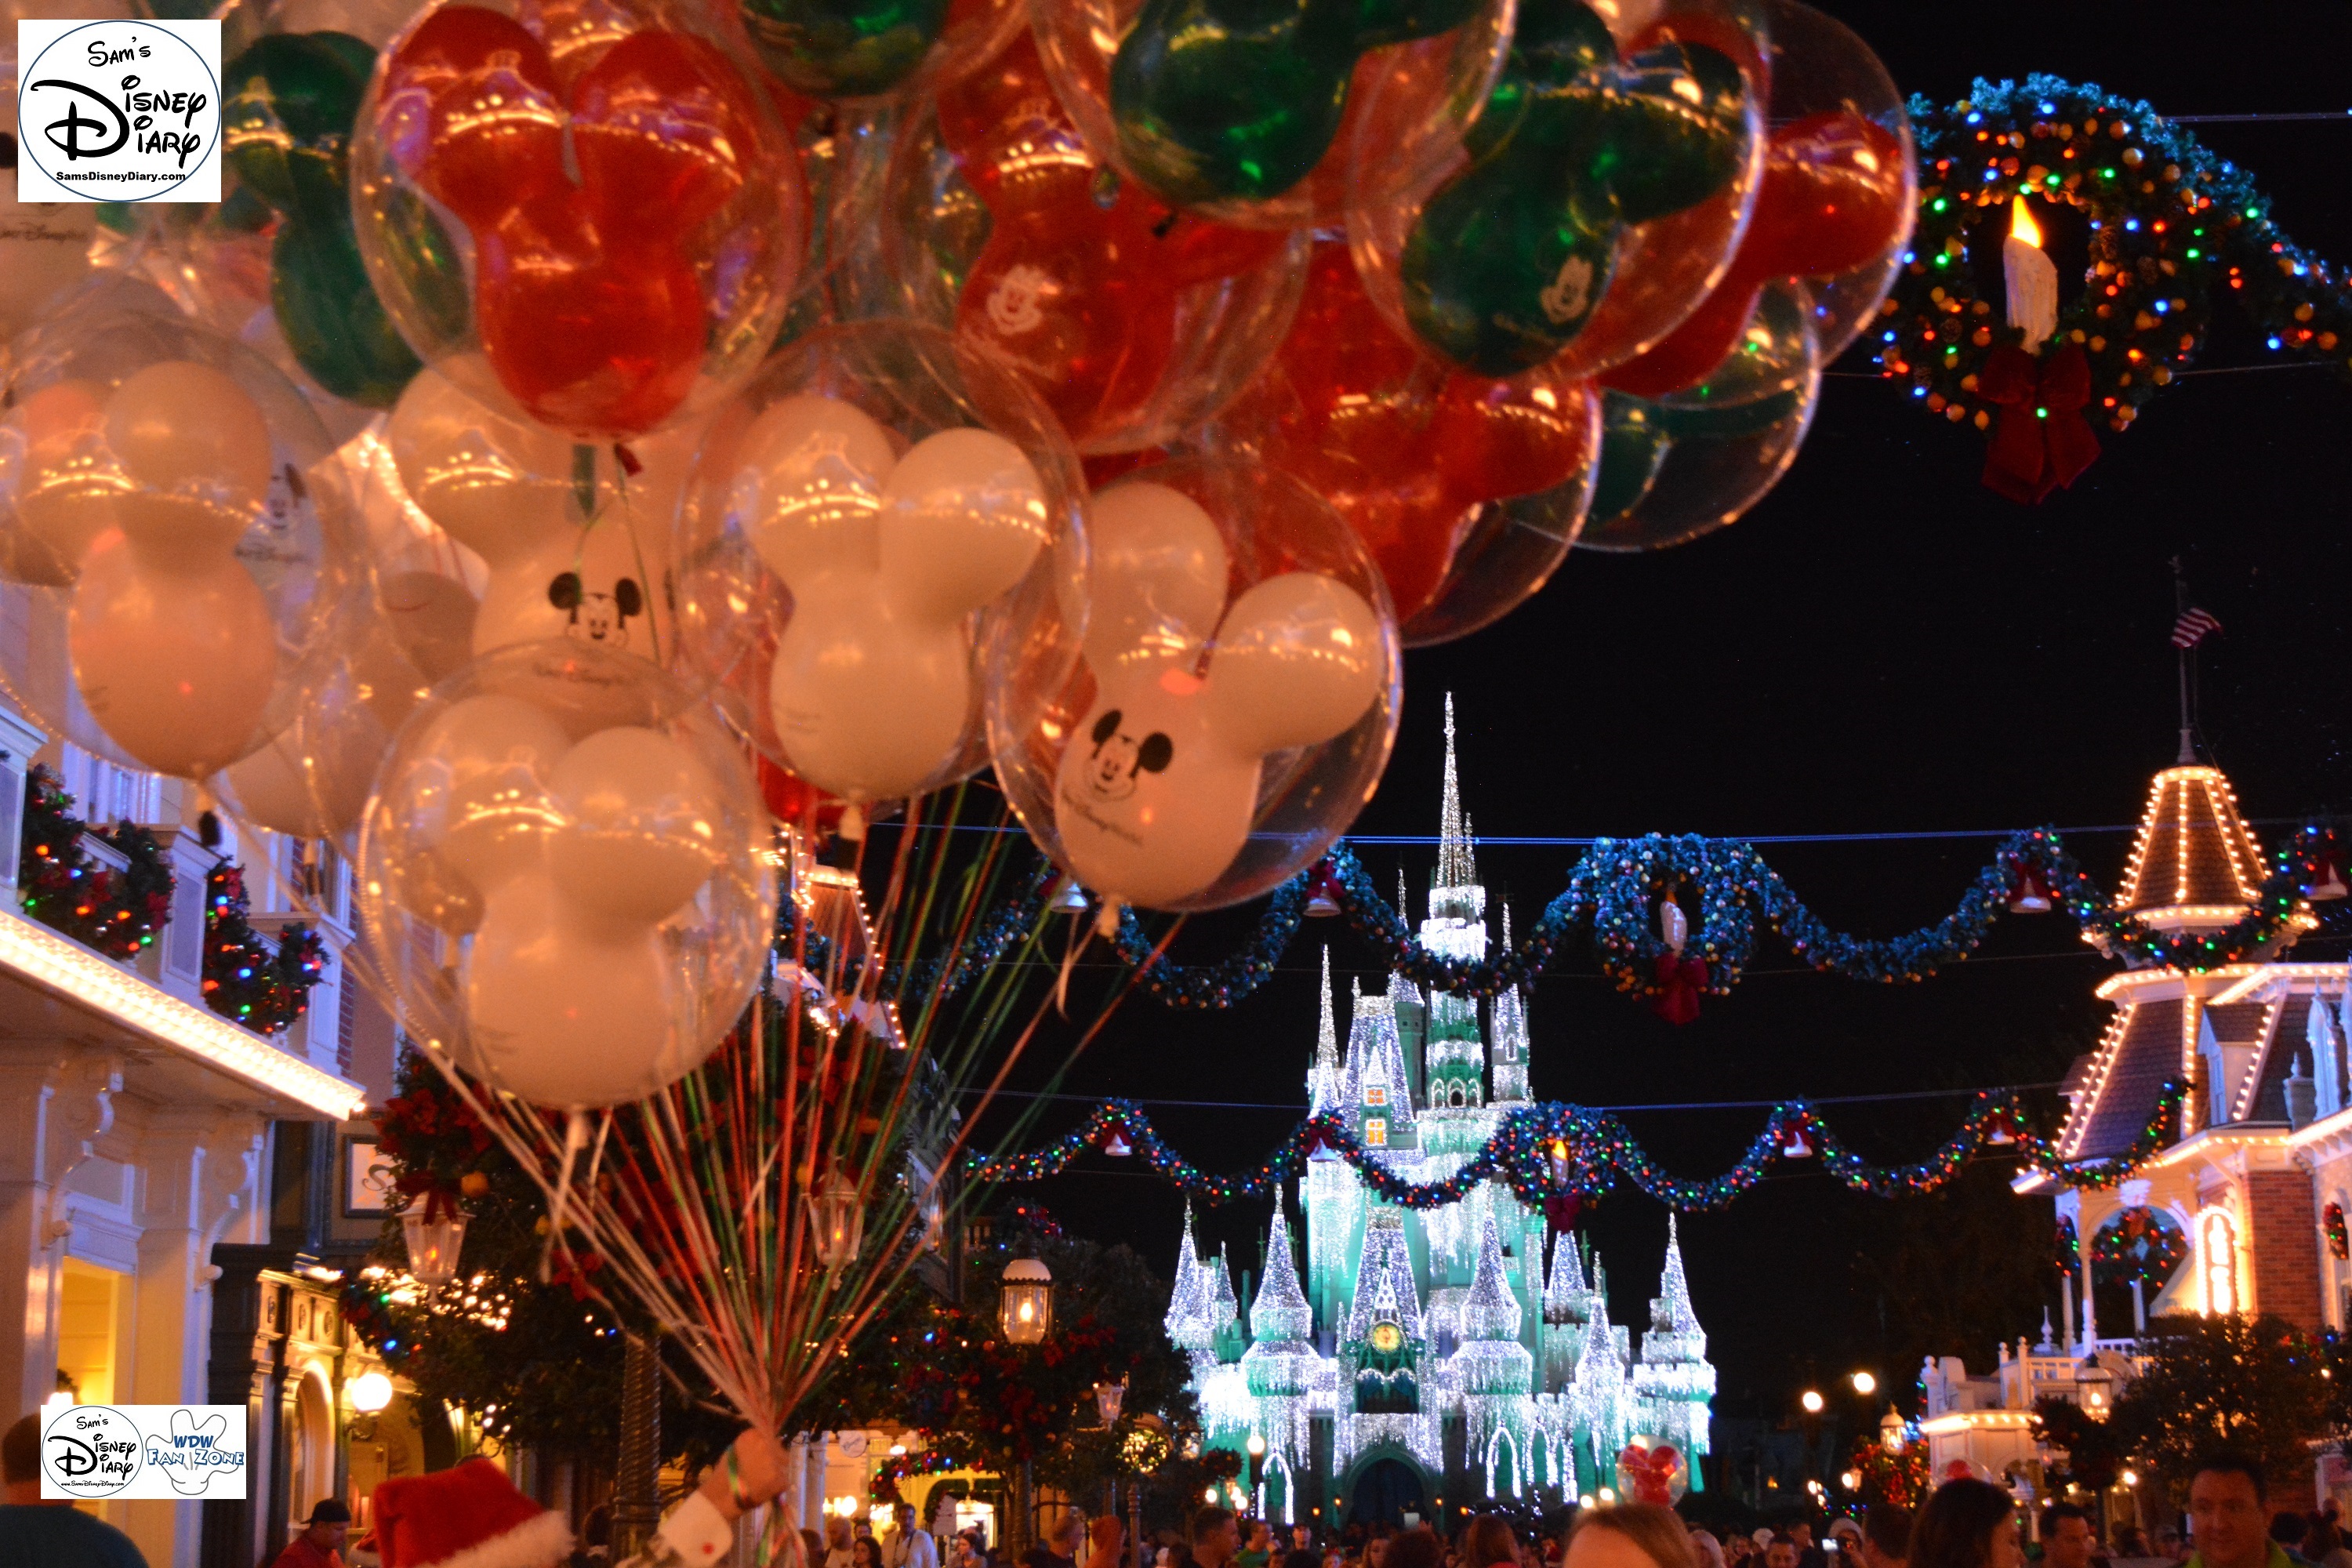 Sams Disney Diary #65 - Cinderella Castle Lights and Main Street Christmas Decorations as seen in 2013 - Before the Daily Festival of Fantasy Parade - The Parade required the decorations be changed to accommodate the large floats on main street.